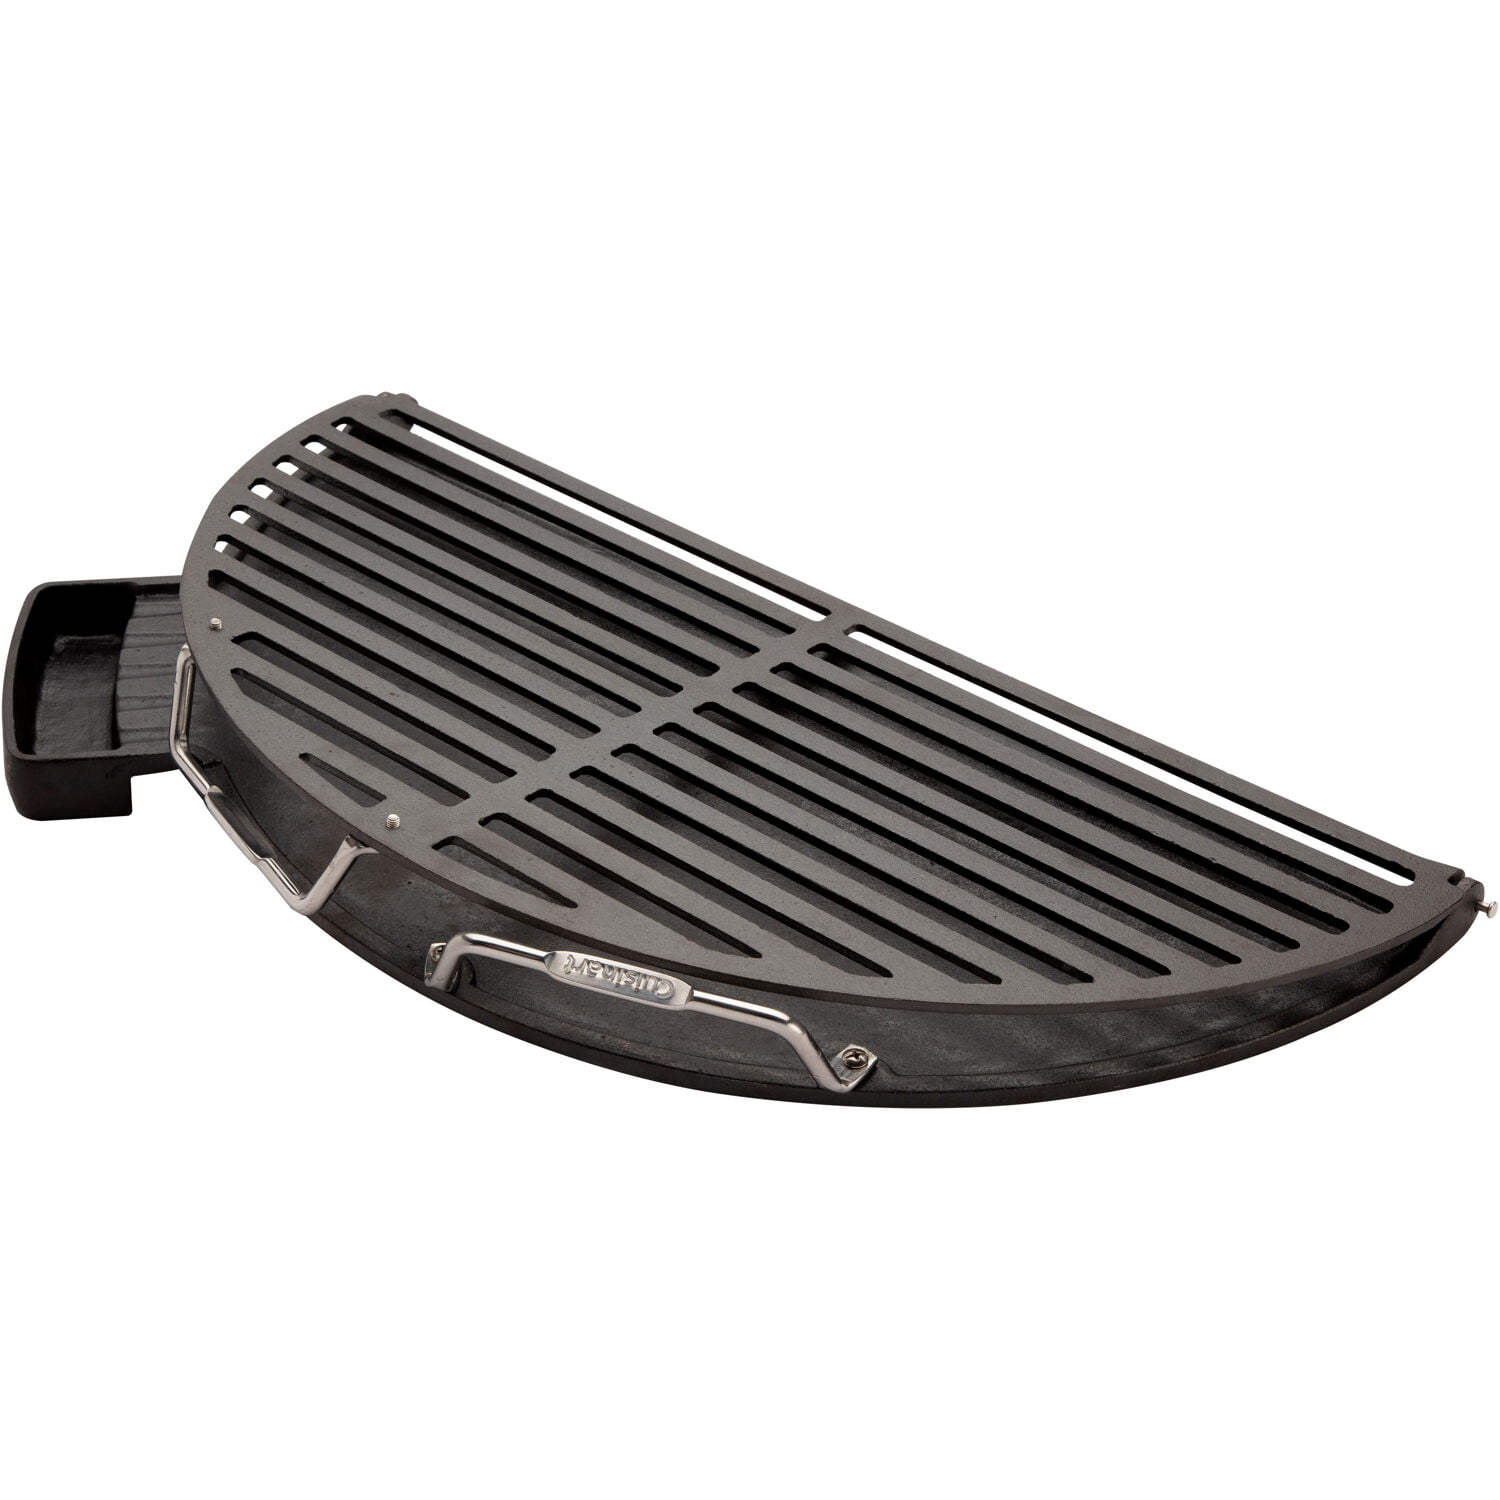 Cuisinart Cleanburn Fire Pit Griddle and Grill Top - Walmart.com